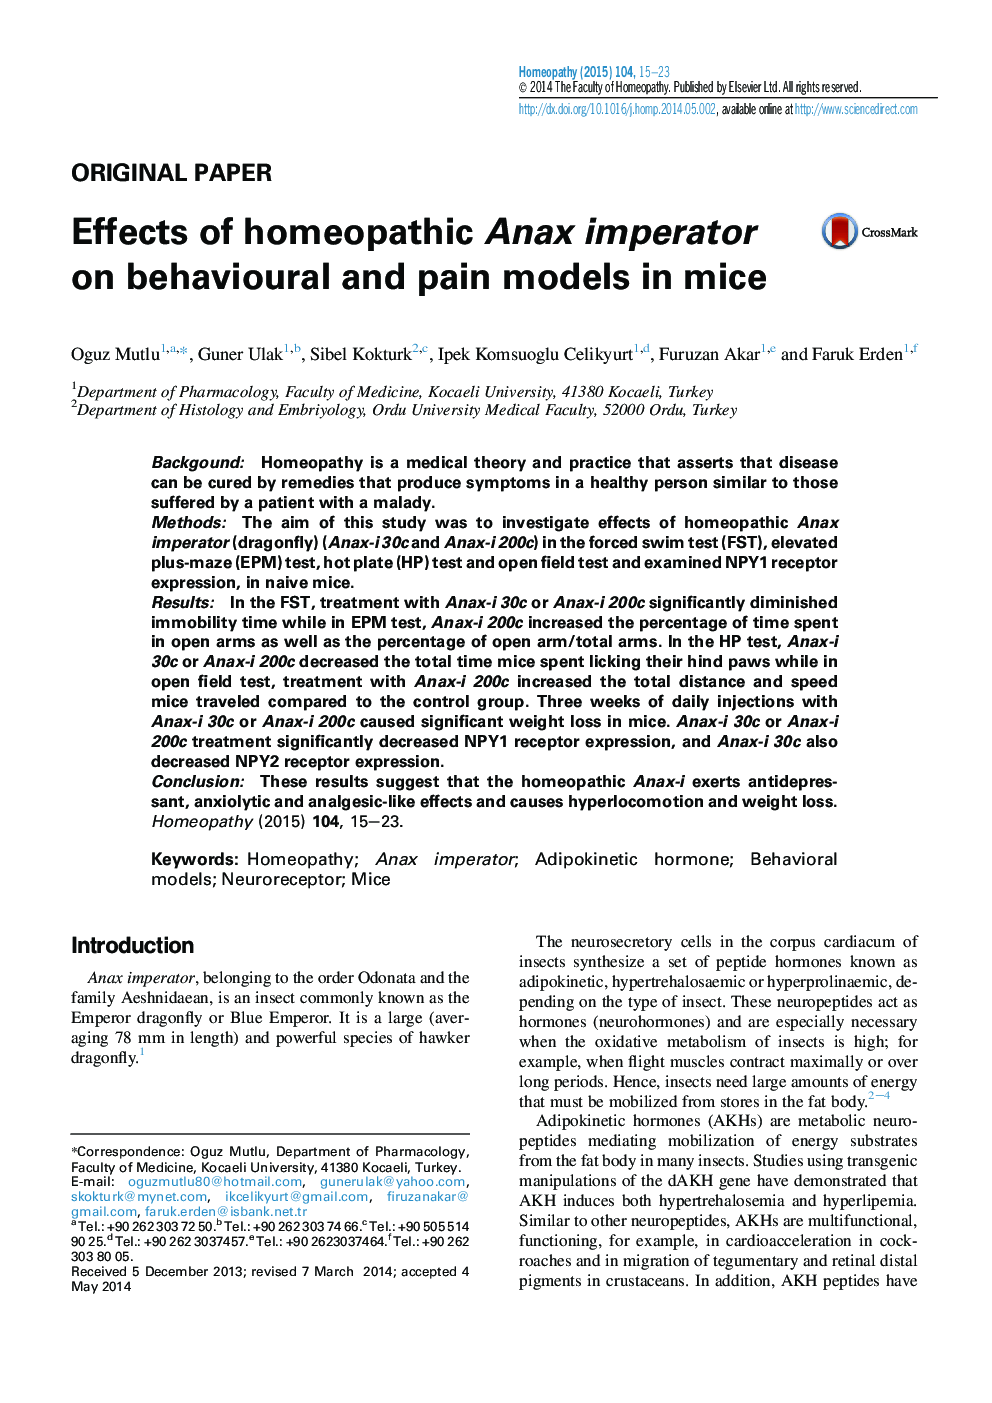 Effects of homeopathic Anax imperator on behavioural and pain models in mice